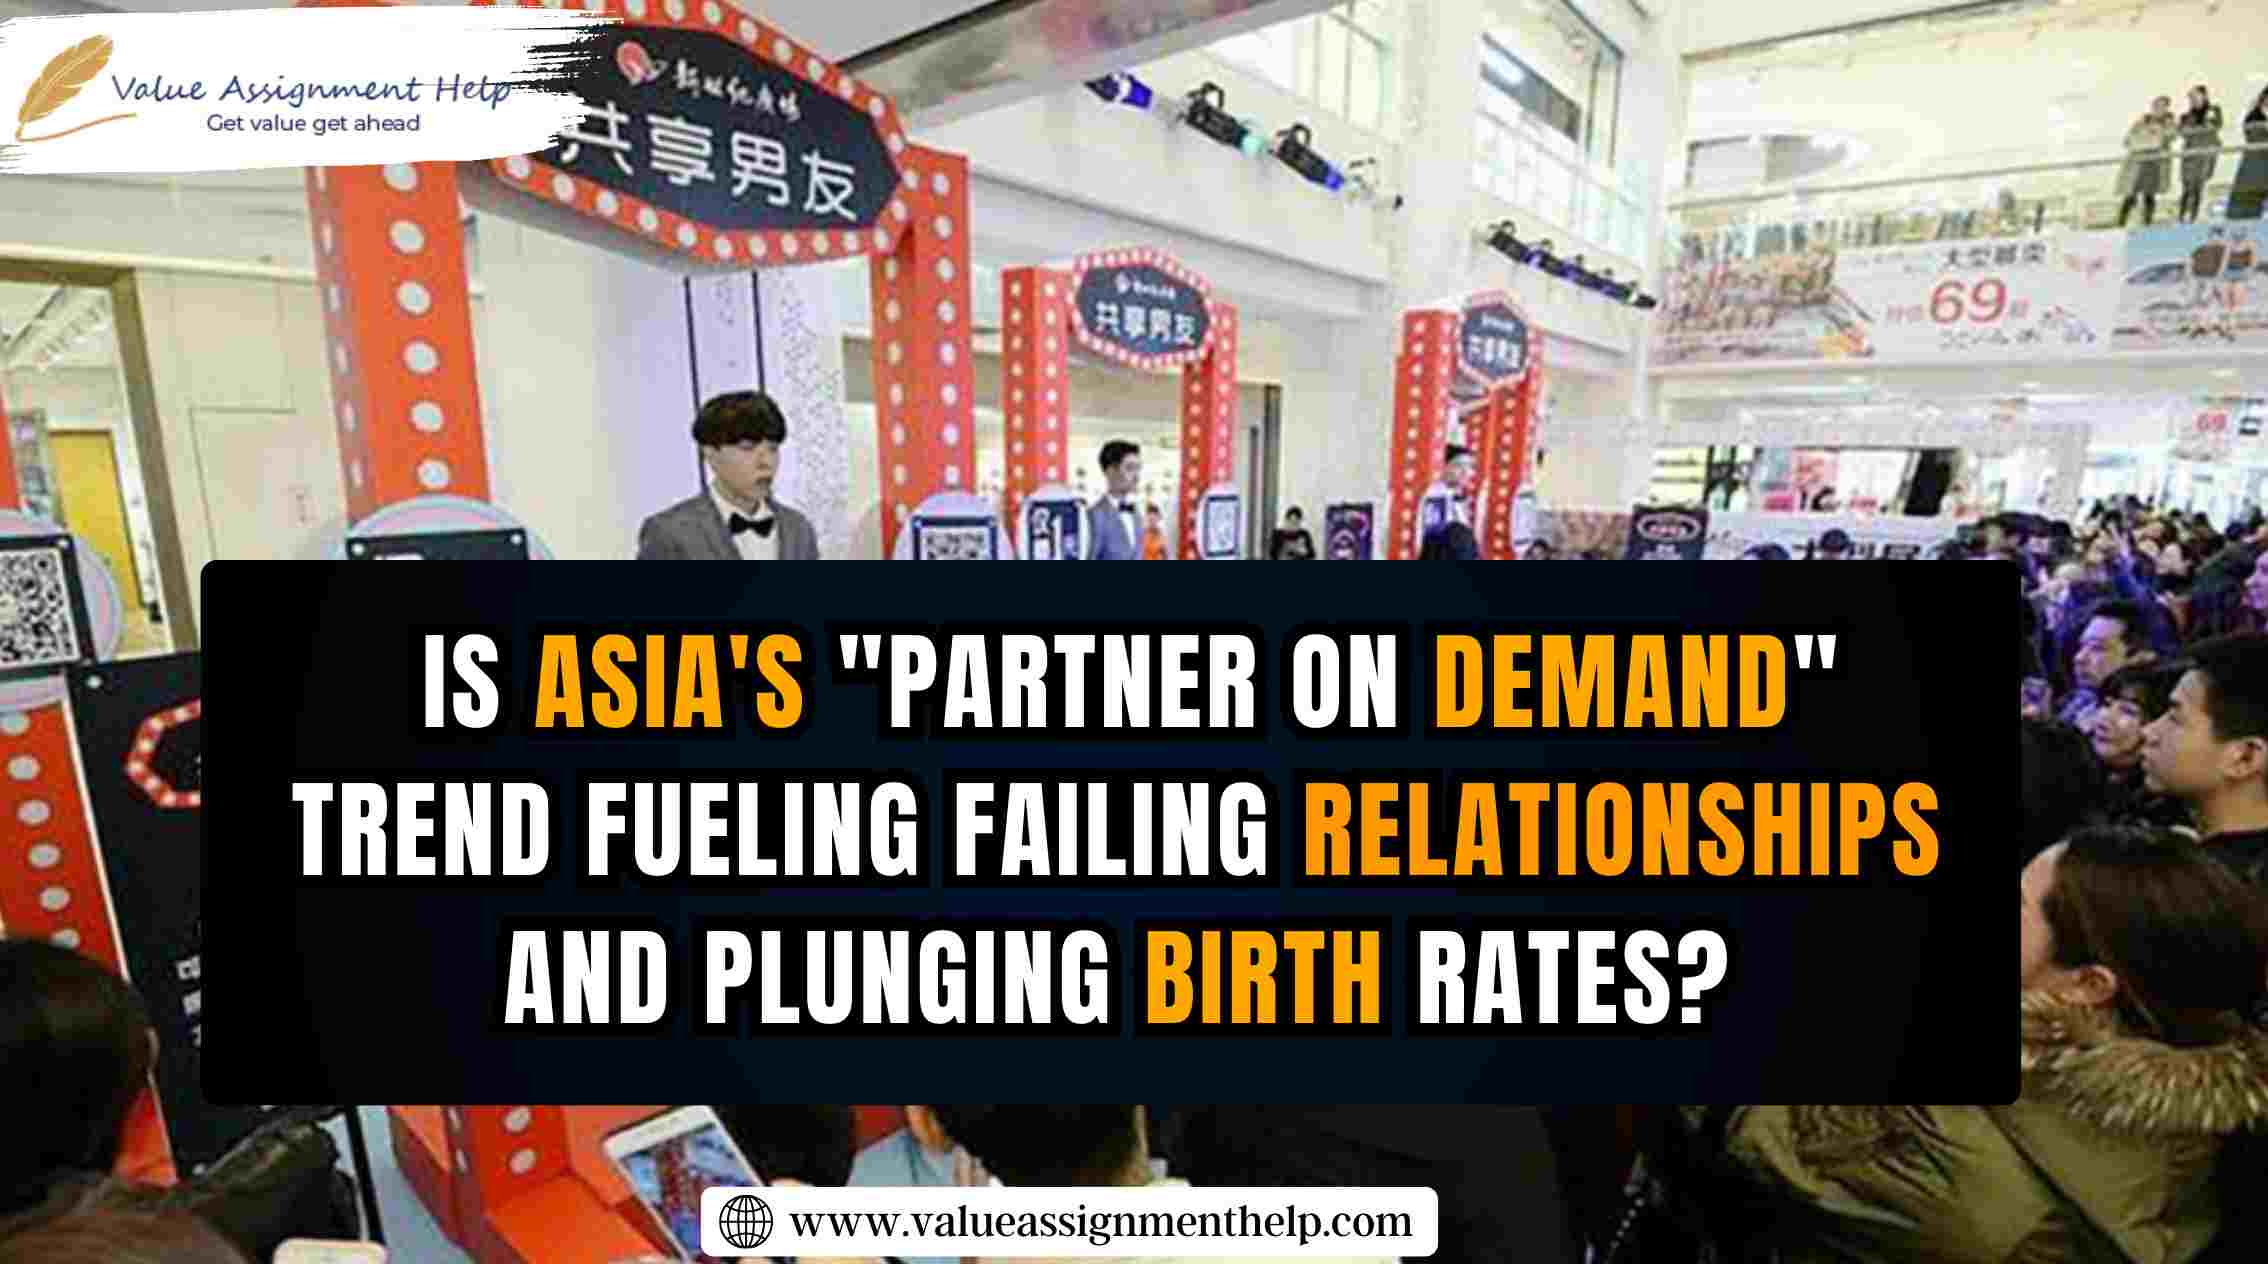  Is Asia's Partner-on-Demand Trend Hurting Relationships?